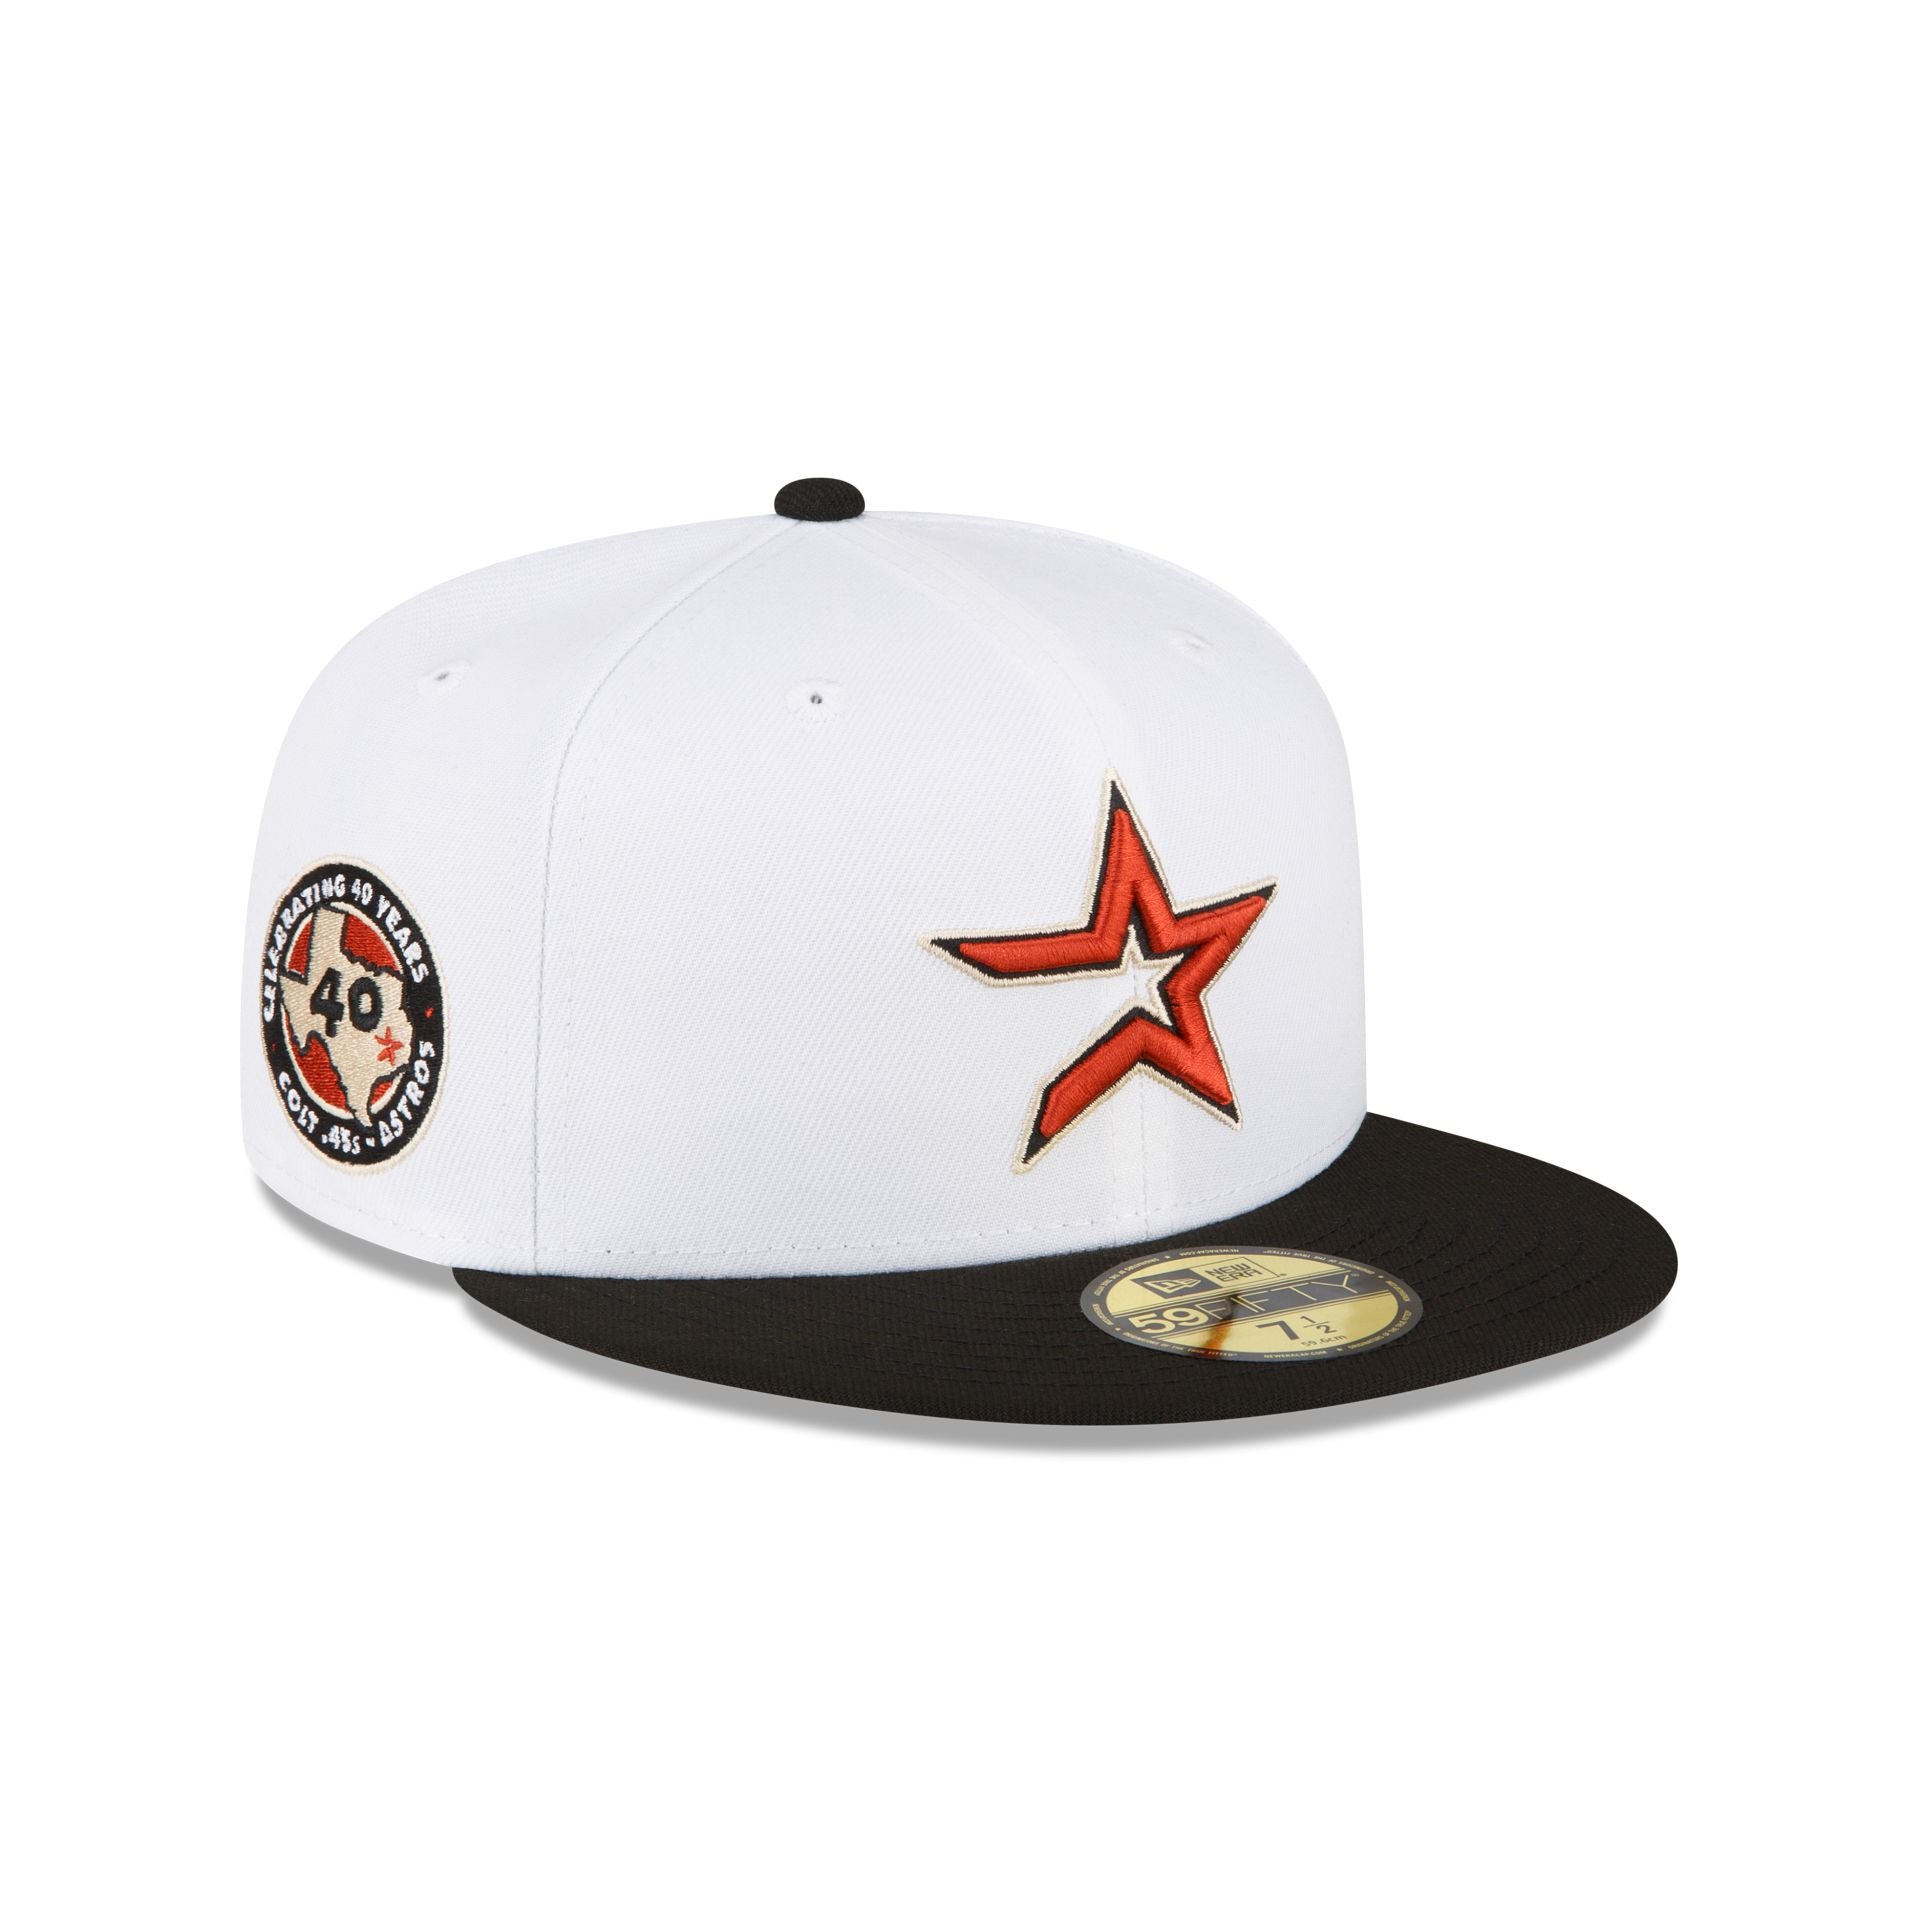 Houston Astros Home 59FIFTY Fitted Hat, White - Size: 8, MLB by New Era